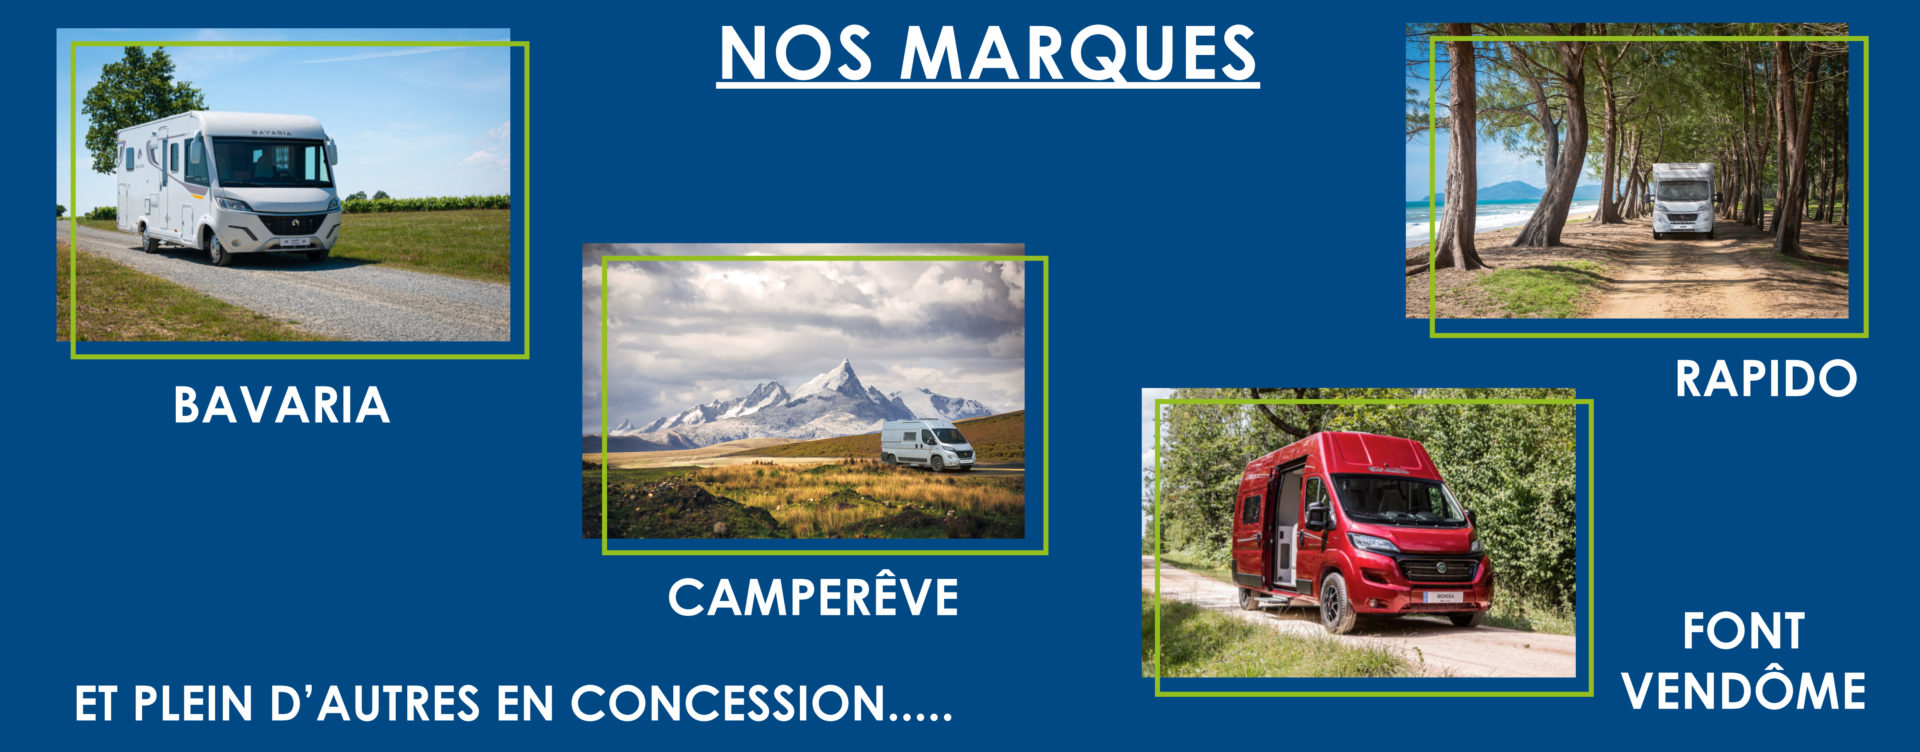 MARQUES CAMPING-CAR CARAVANING CENTRAL